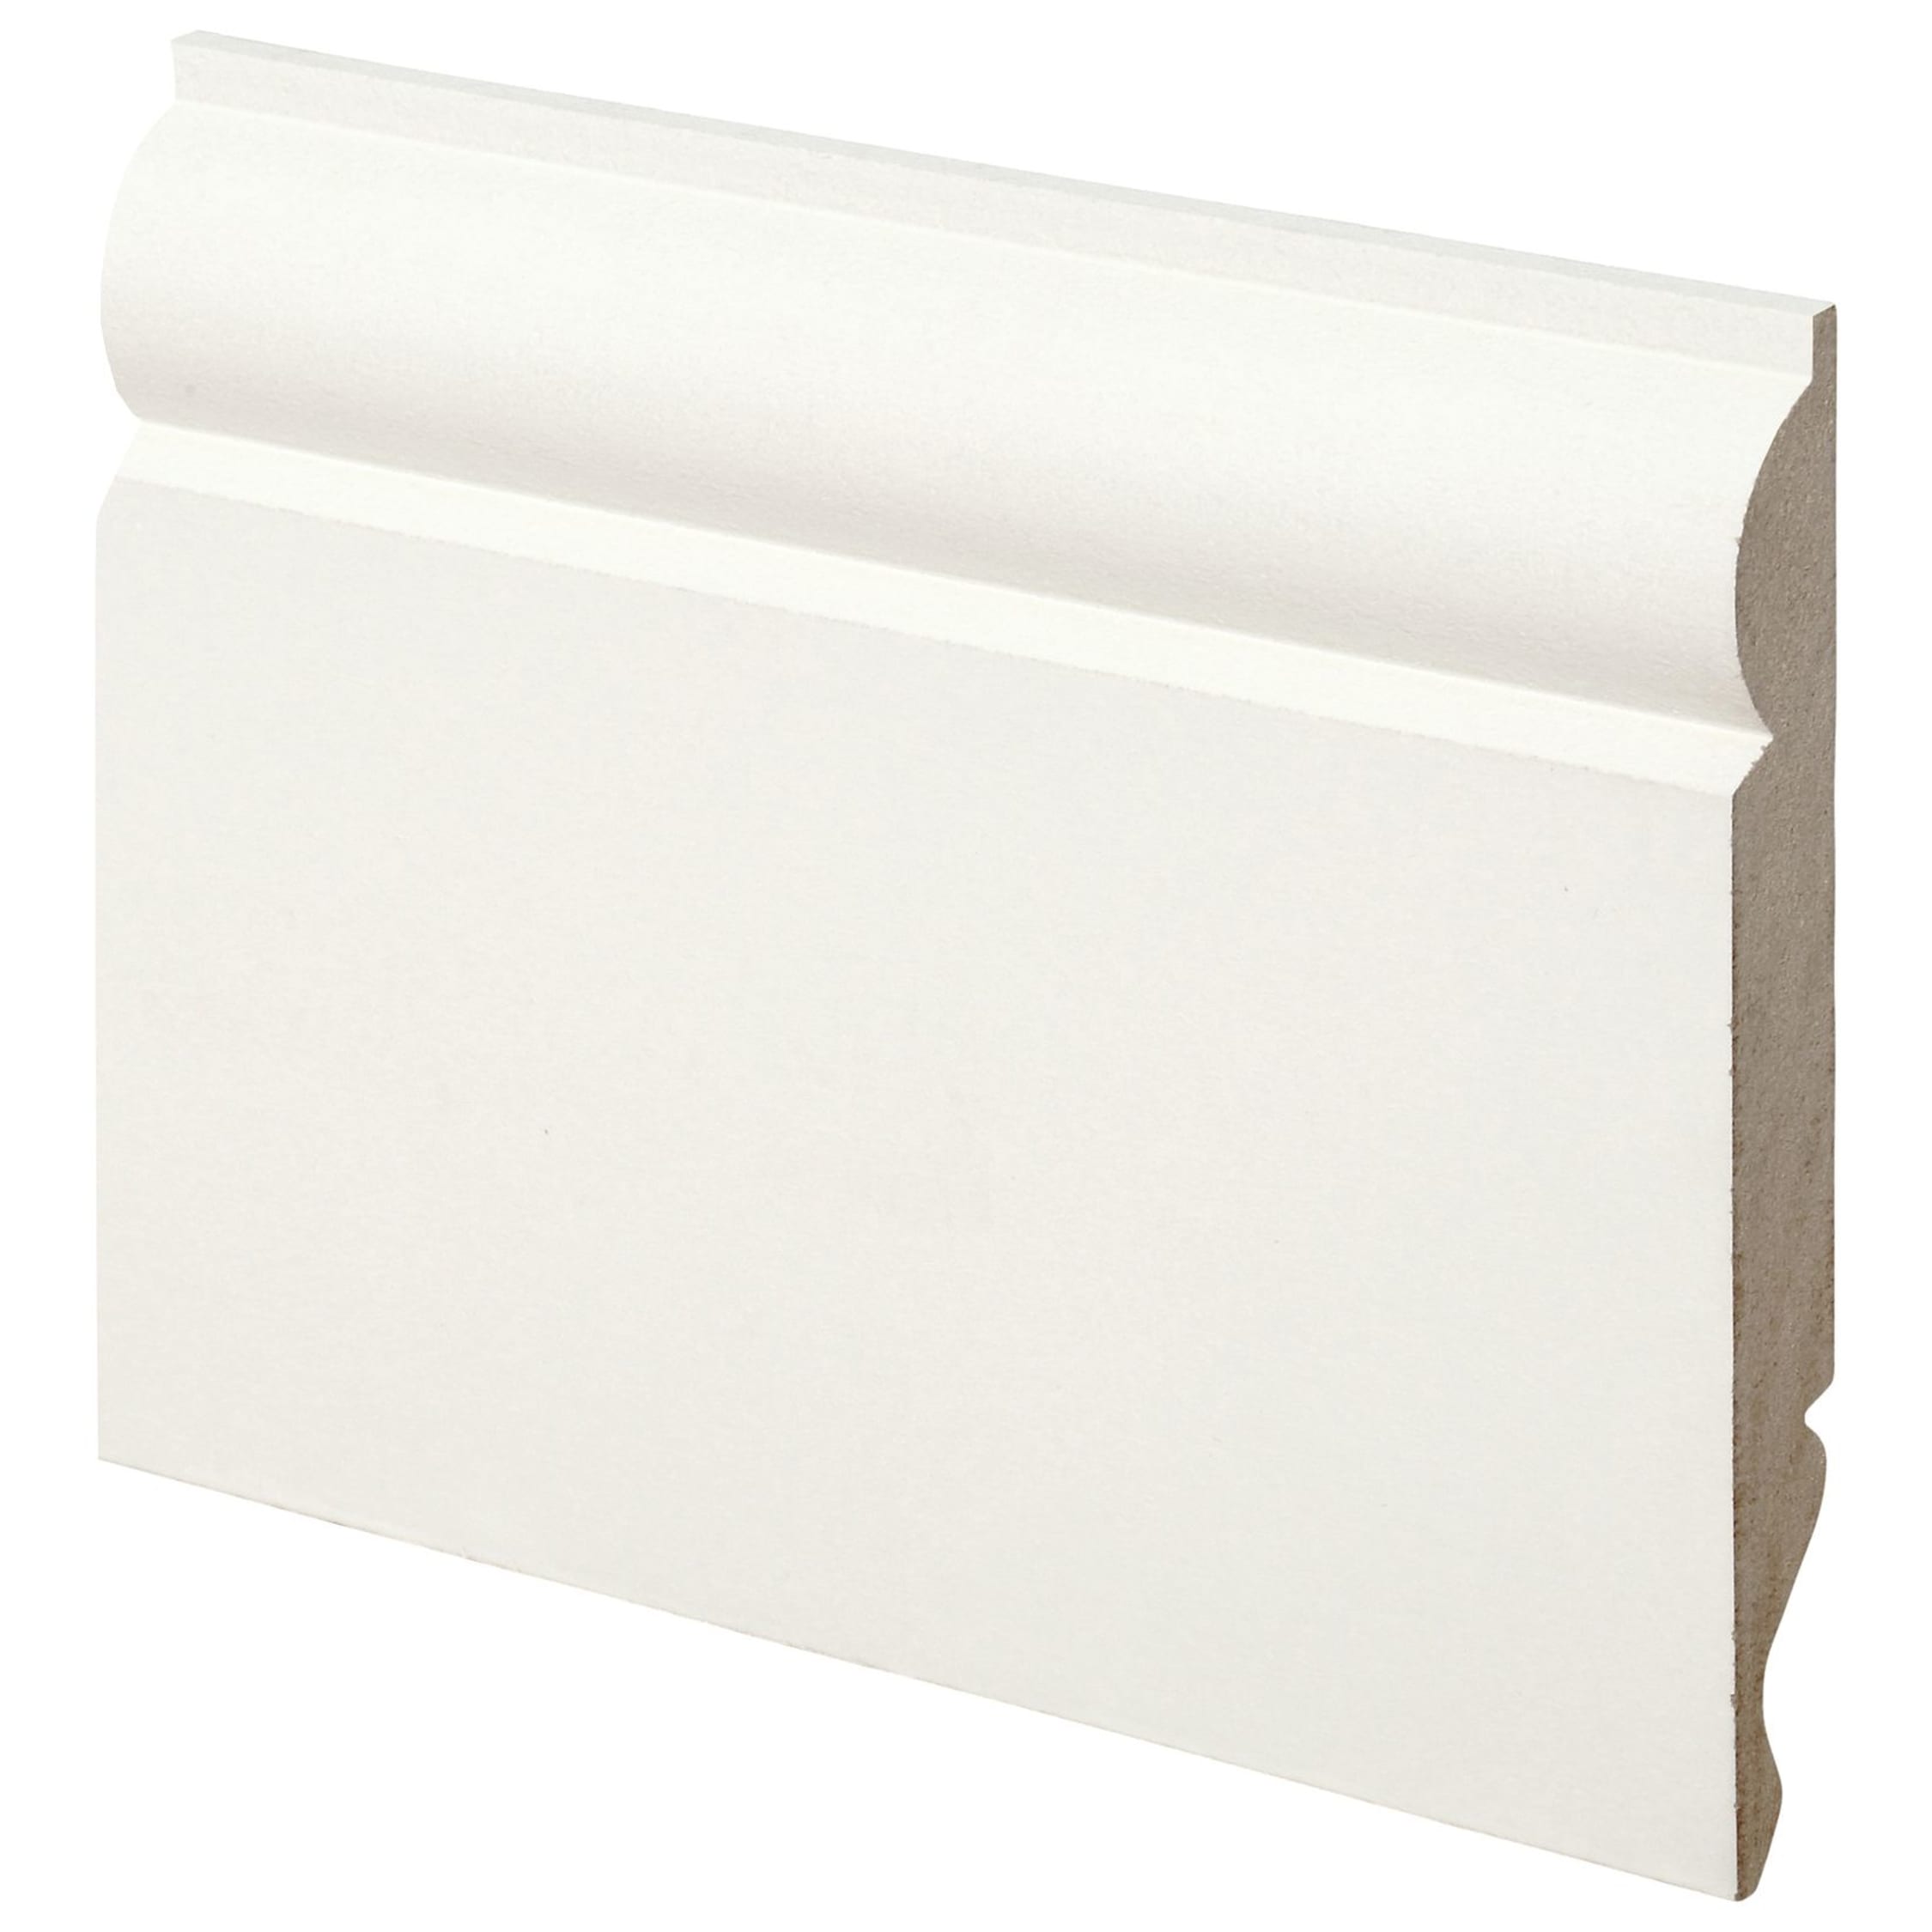 MDF Skirting Board Modern Pattern 23 White Primed  Choice of Heights and Lengths 